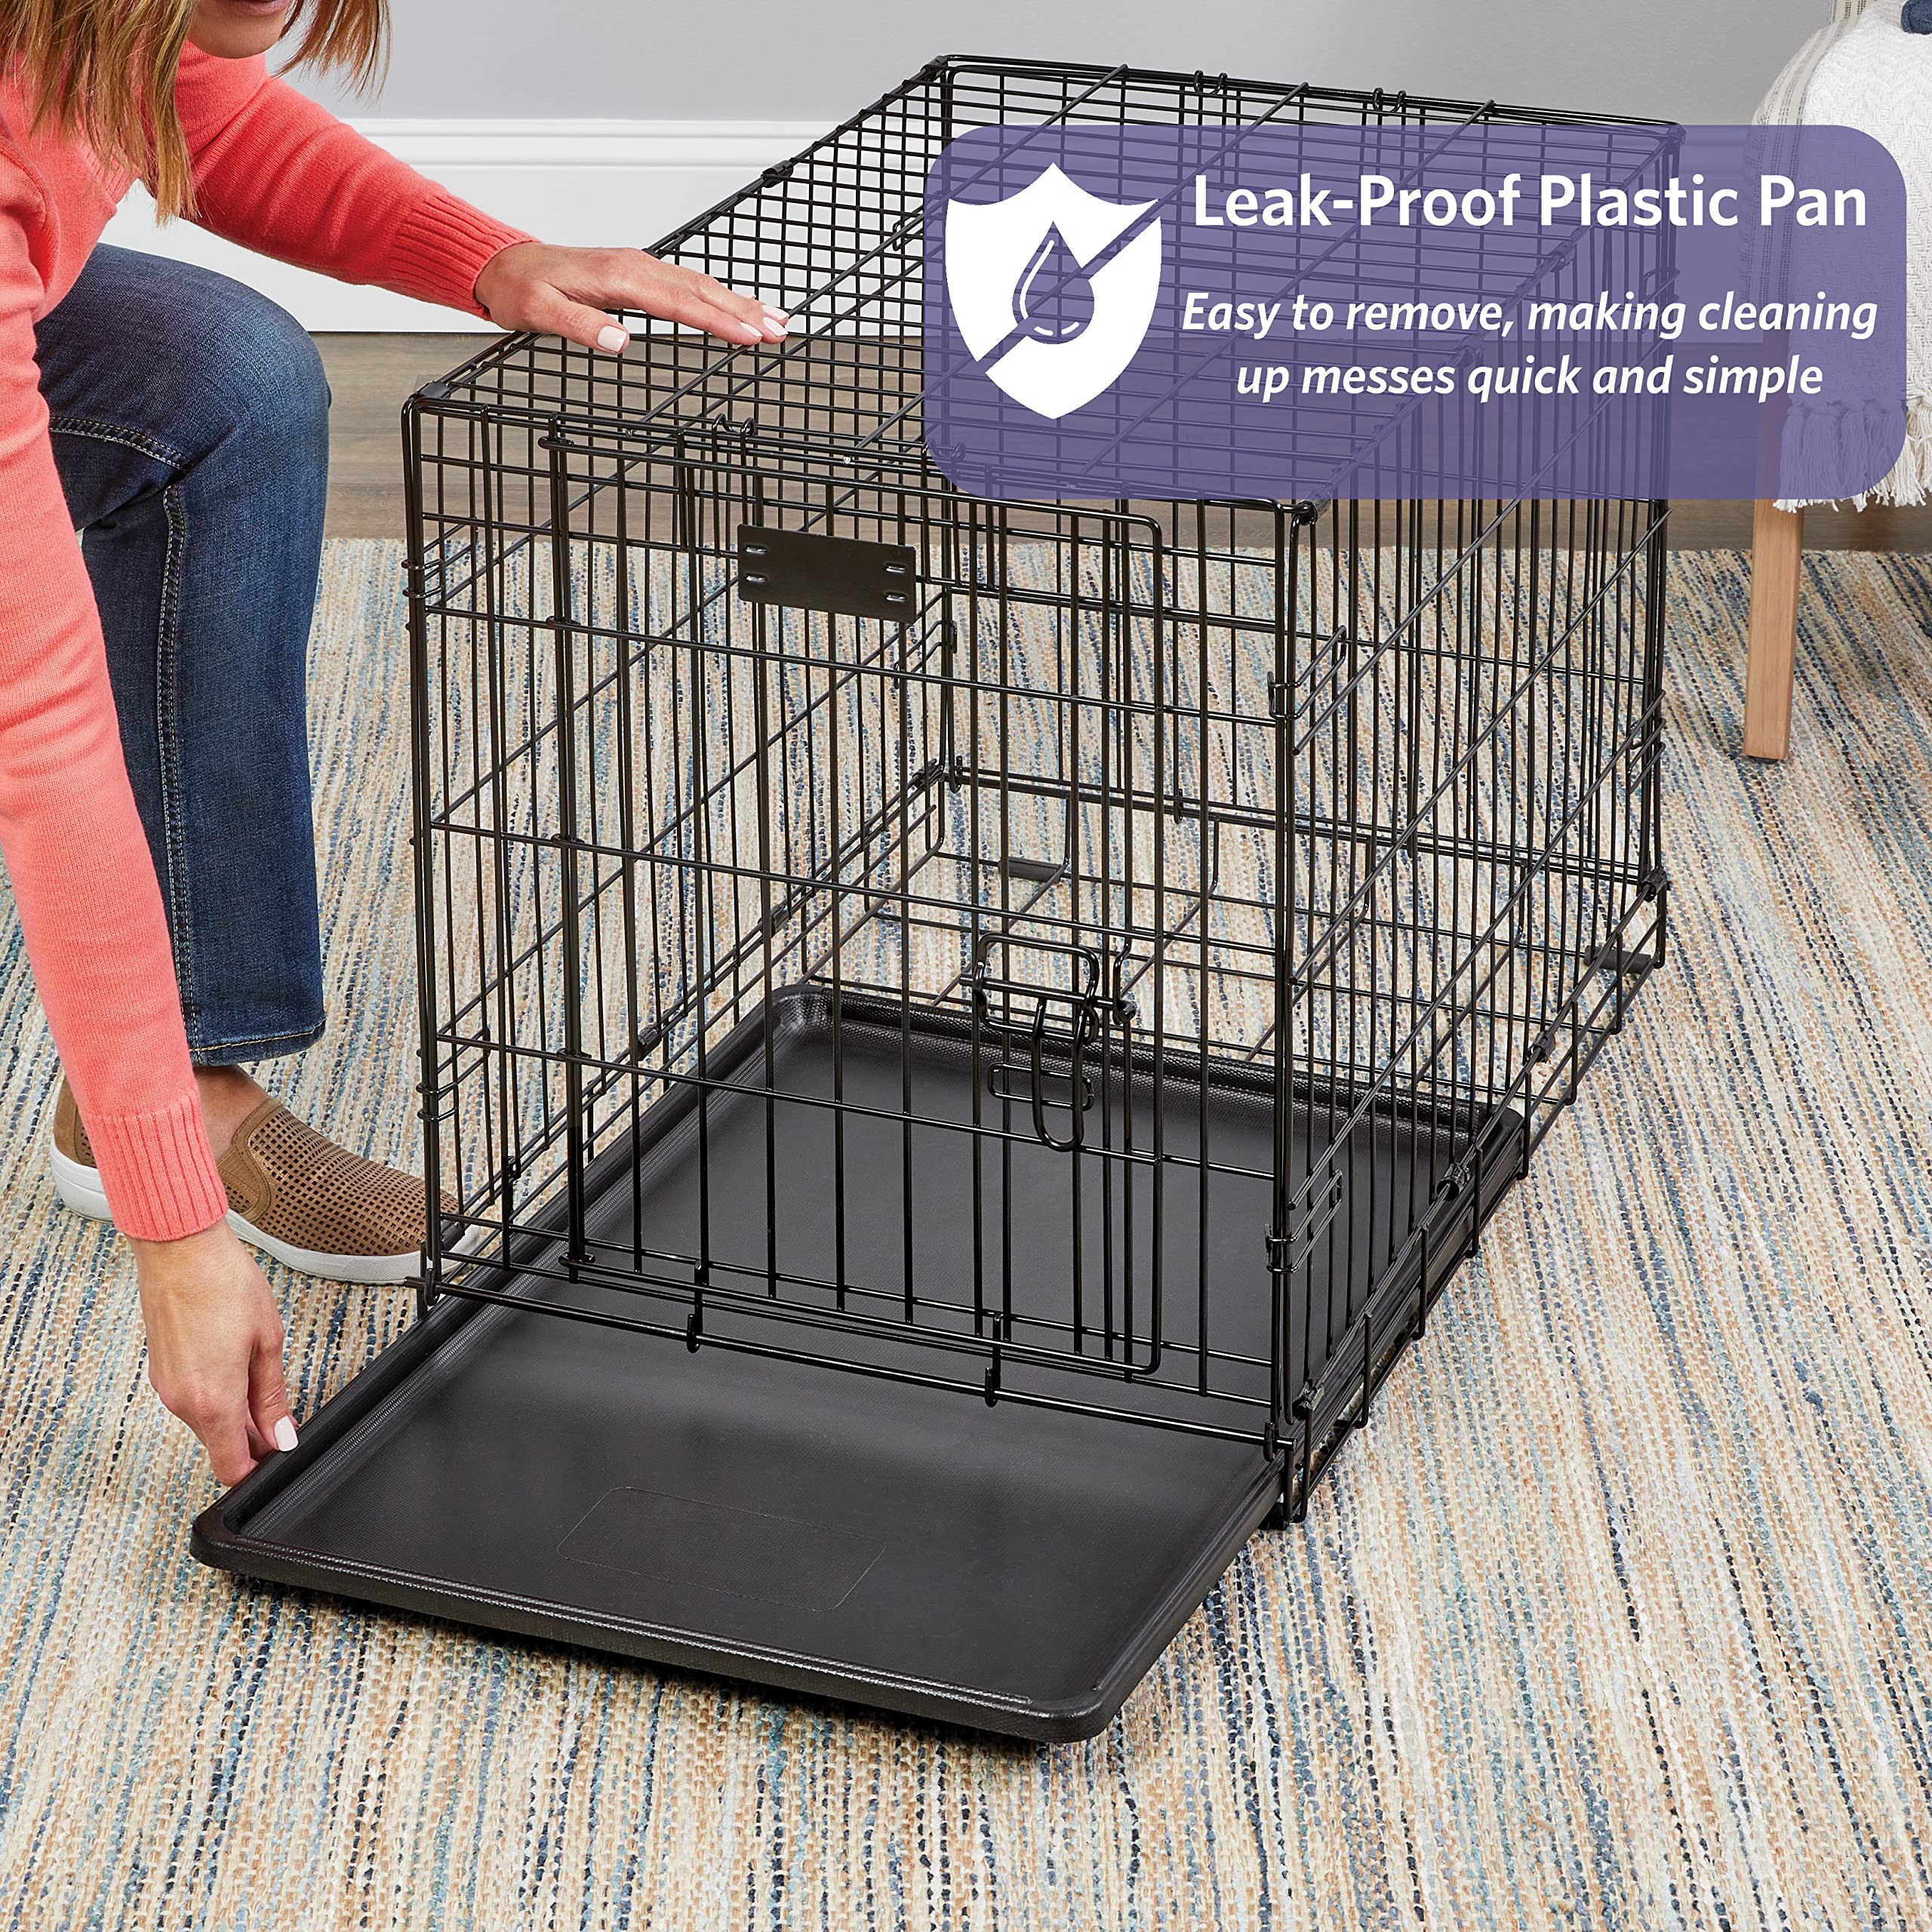 MidWest Homes for Pets Newly Enhanced Single Door icrate Dog crate, Includes Leak-Proof Pan, Floor Protecting Feet, Divider Pane